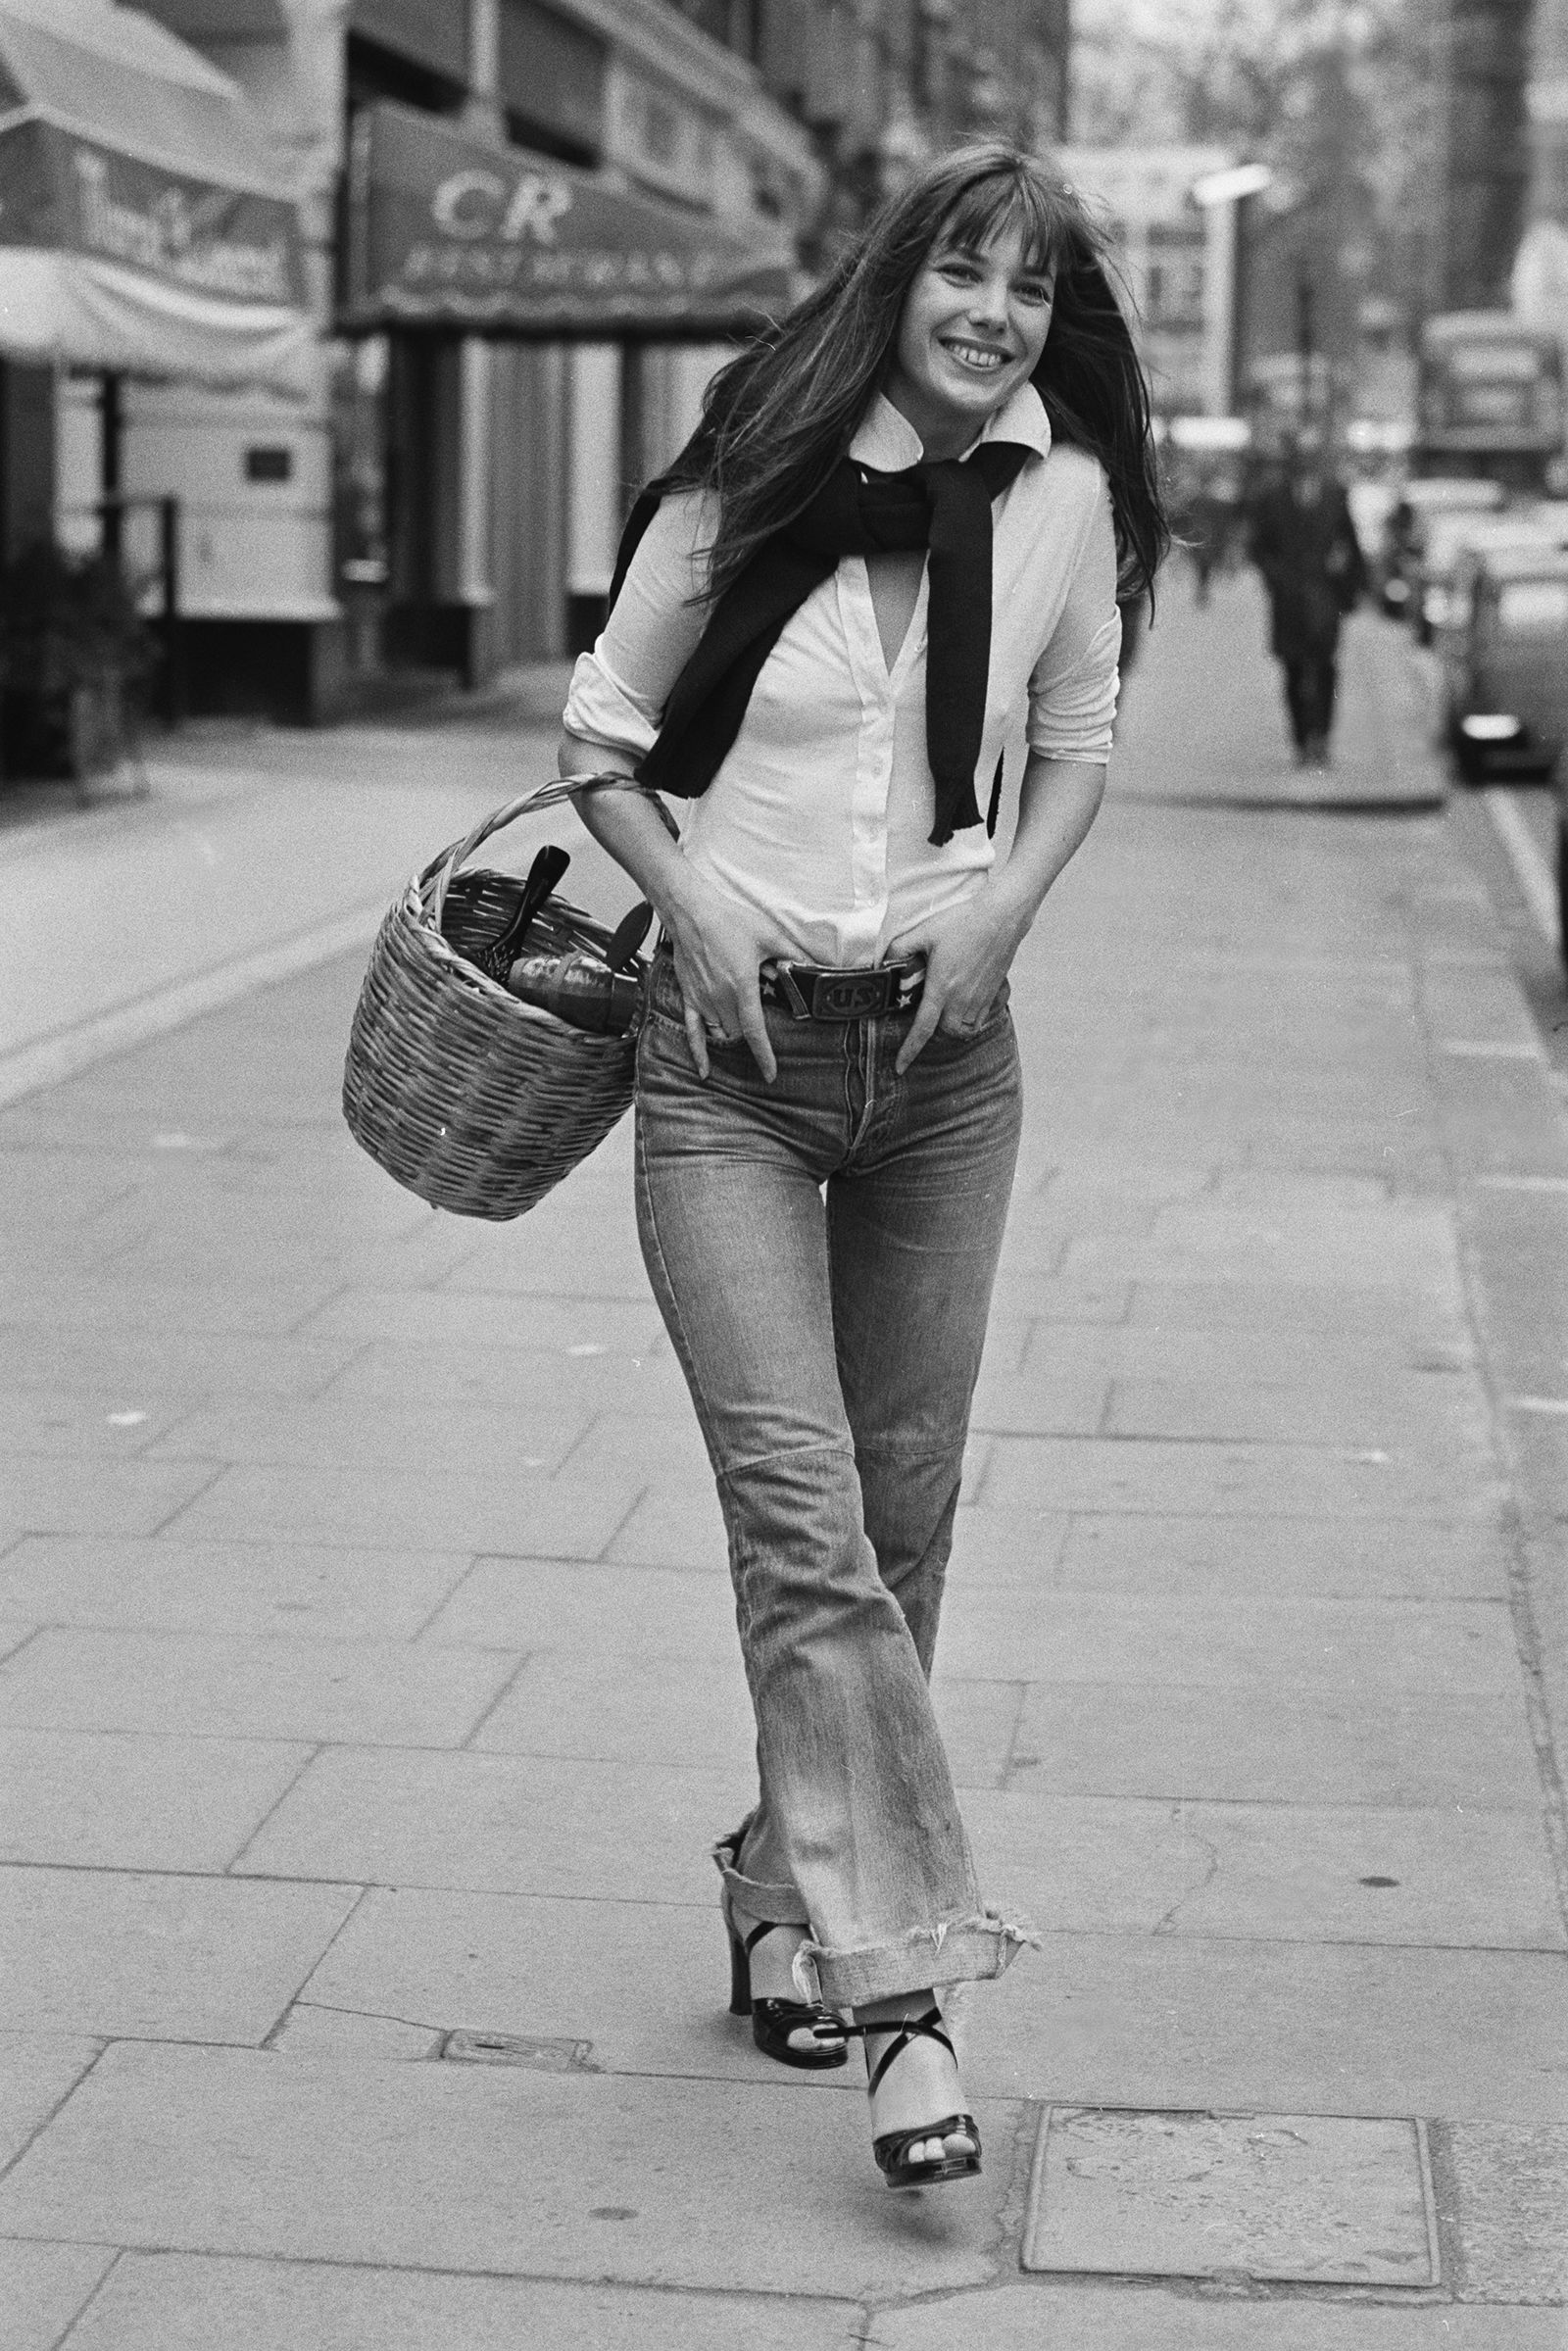 The Birkin Bag Is Jane Birkin's Style Legacy—This Is How to Buy One